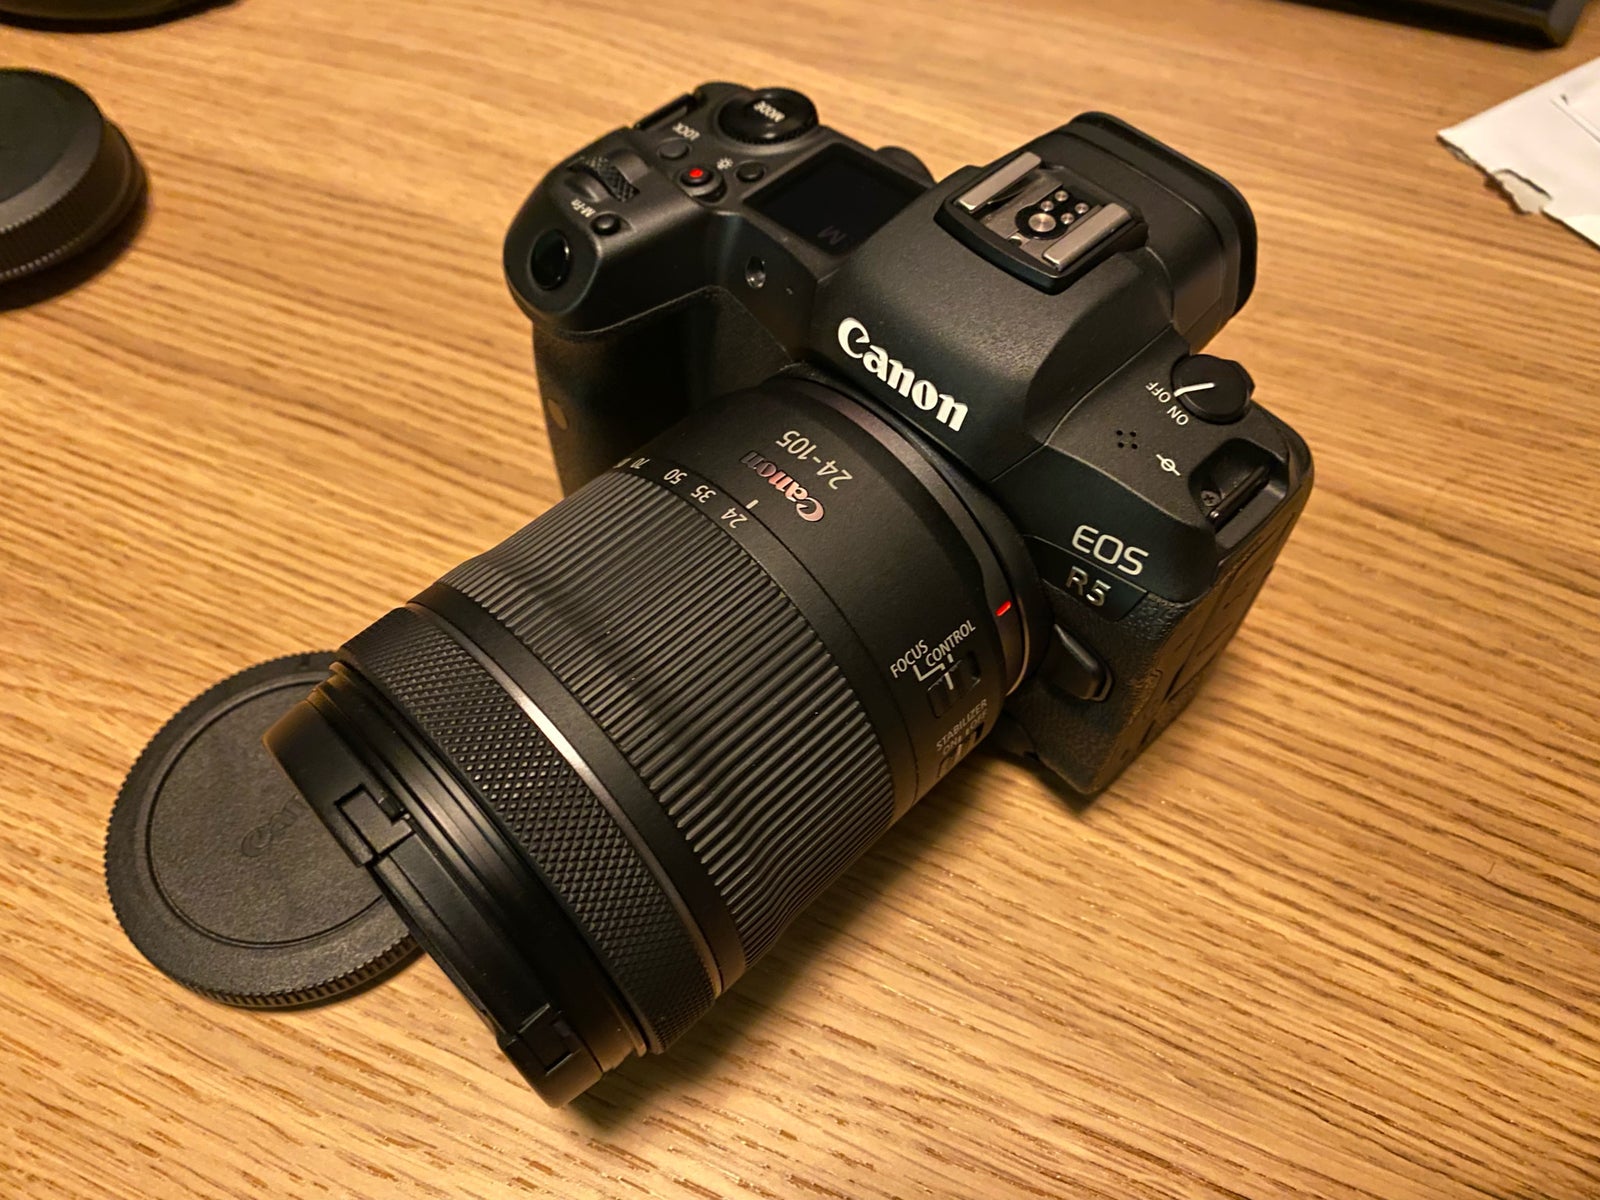 Zoom, Canon, RF 24-105 f4-7.1 IS STM